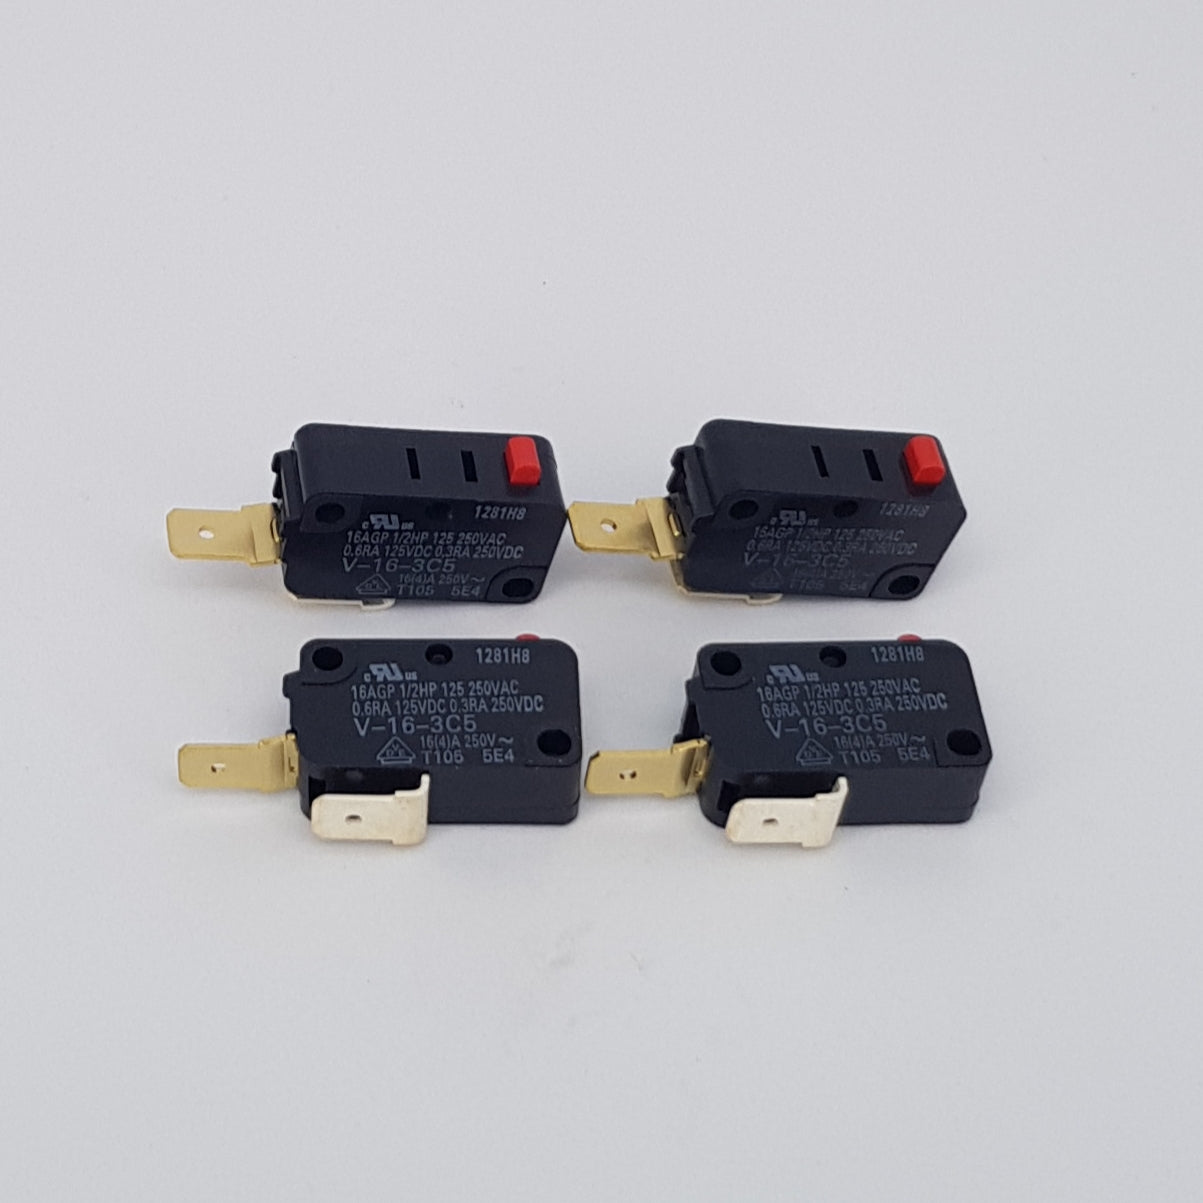 Omron V-16-3C5 microswitch pack